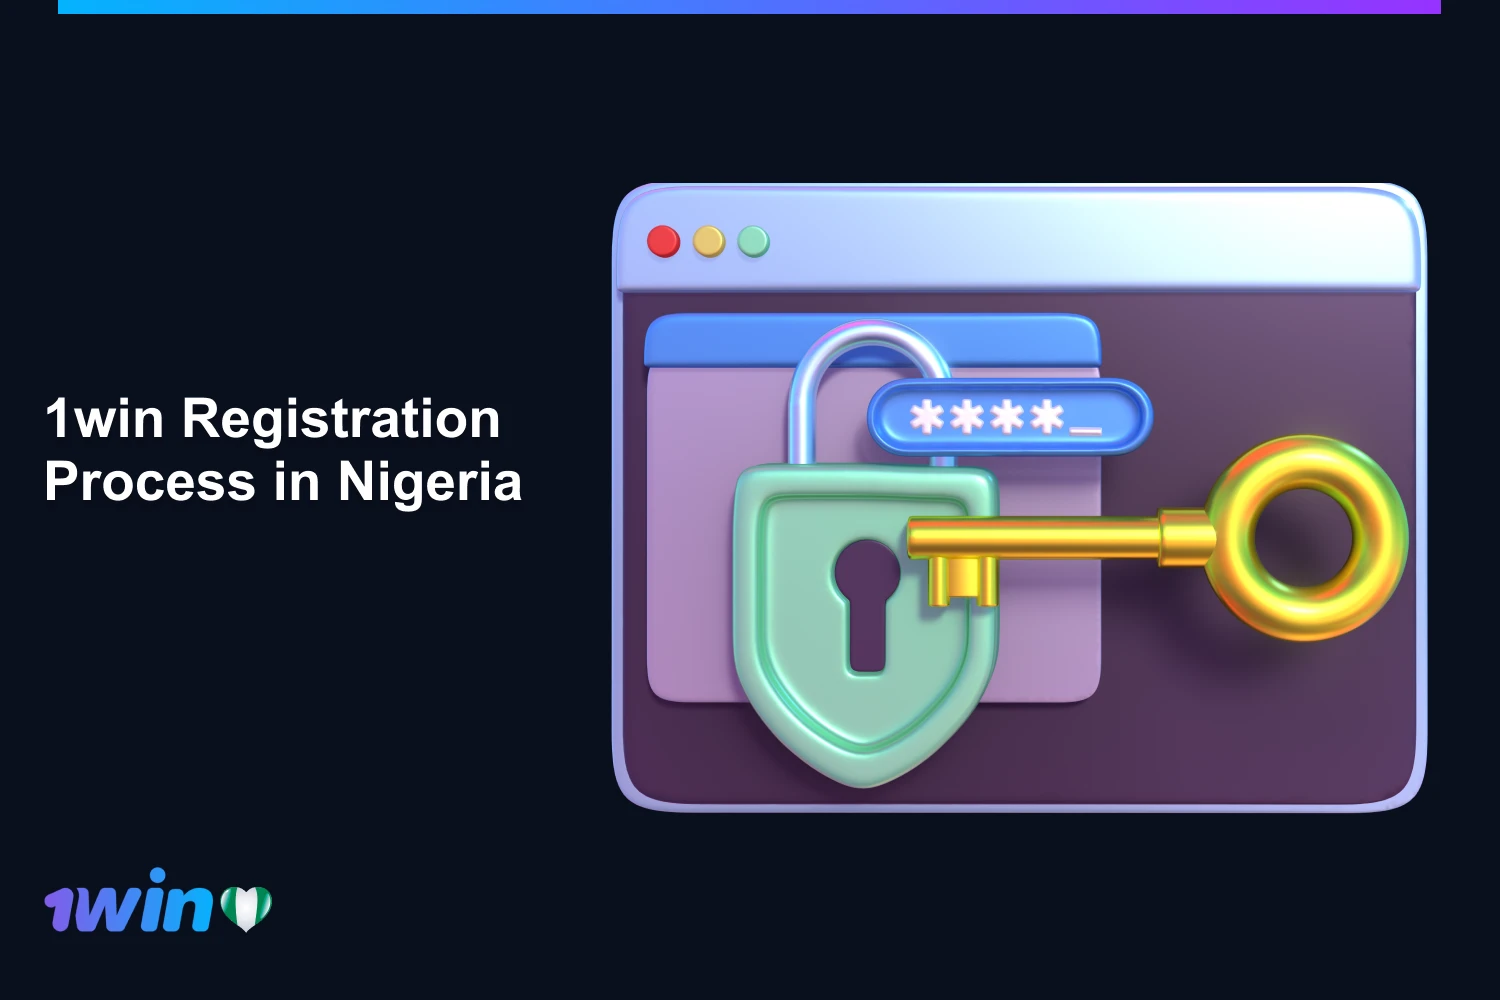 After registering with 1win, Nigerian players will have access to a wide range of sports markets, numerous promotions, online casinos, convenient and verified payment methods and quality support service